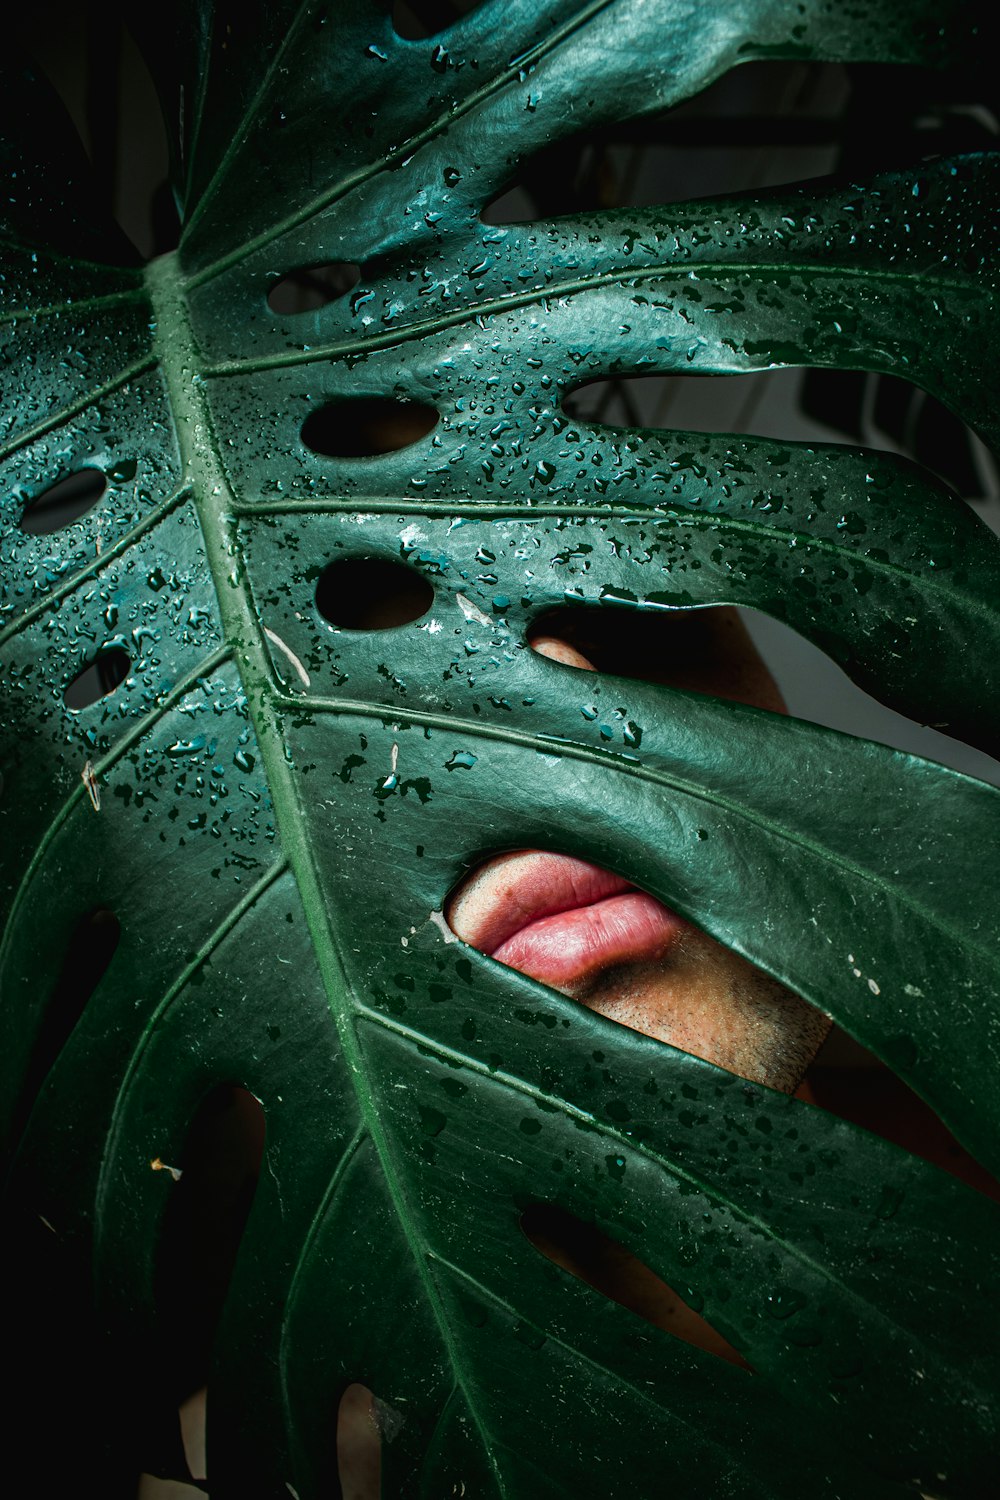 a woman's face peeking out from behind a large green leaf